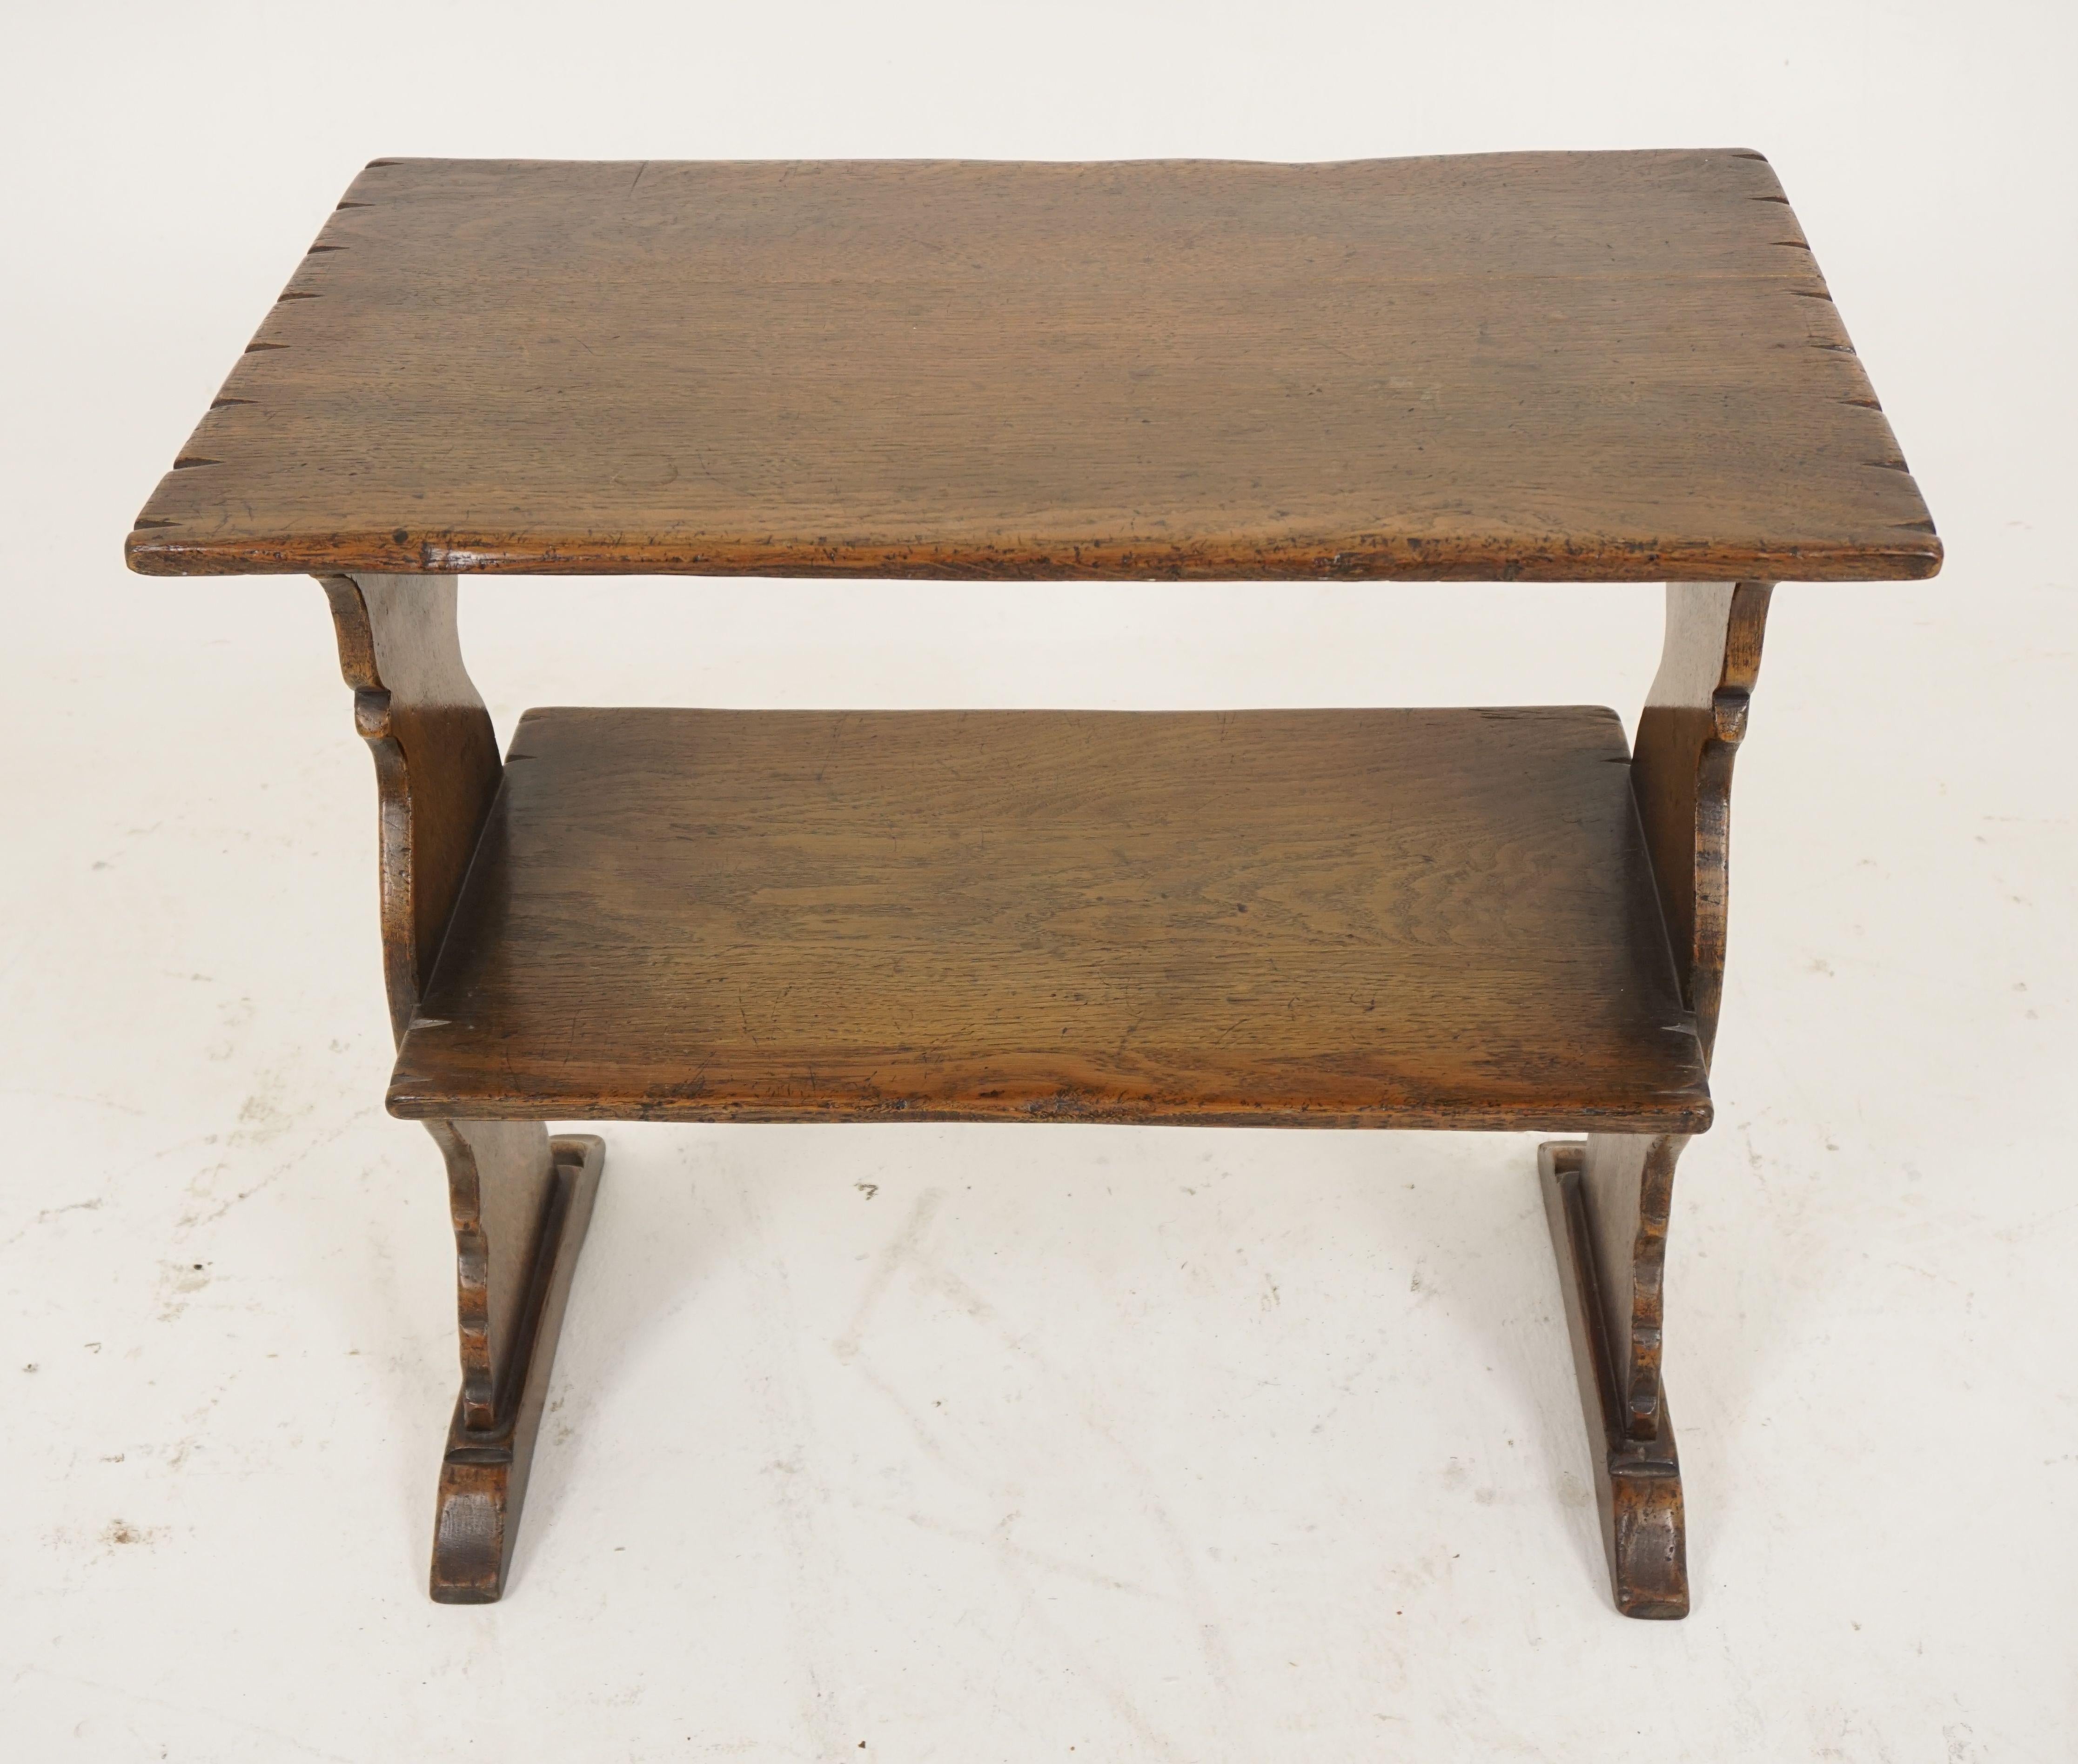 Vintage Oak Table, Two Tiered Bookstand, Antique Furniture, Scotland 1930, B1479 1